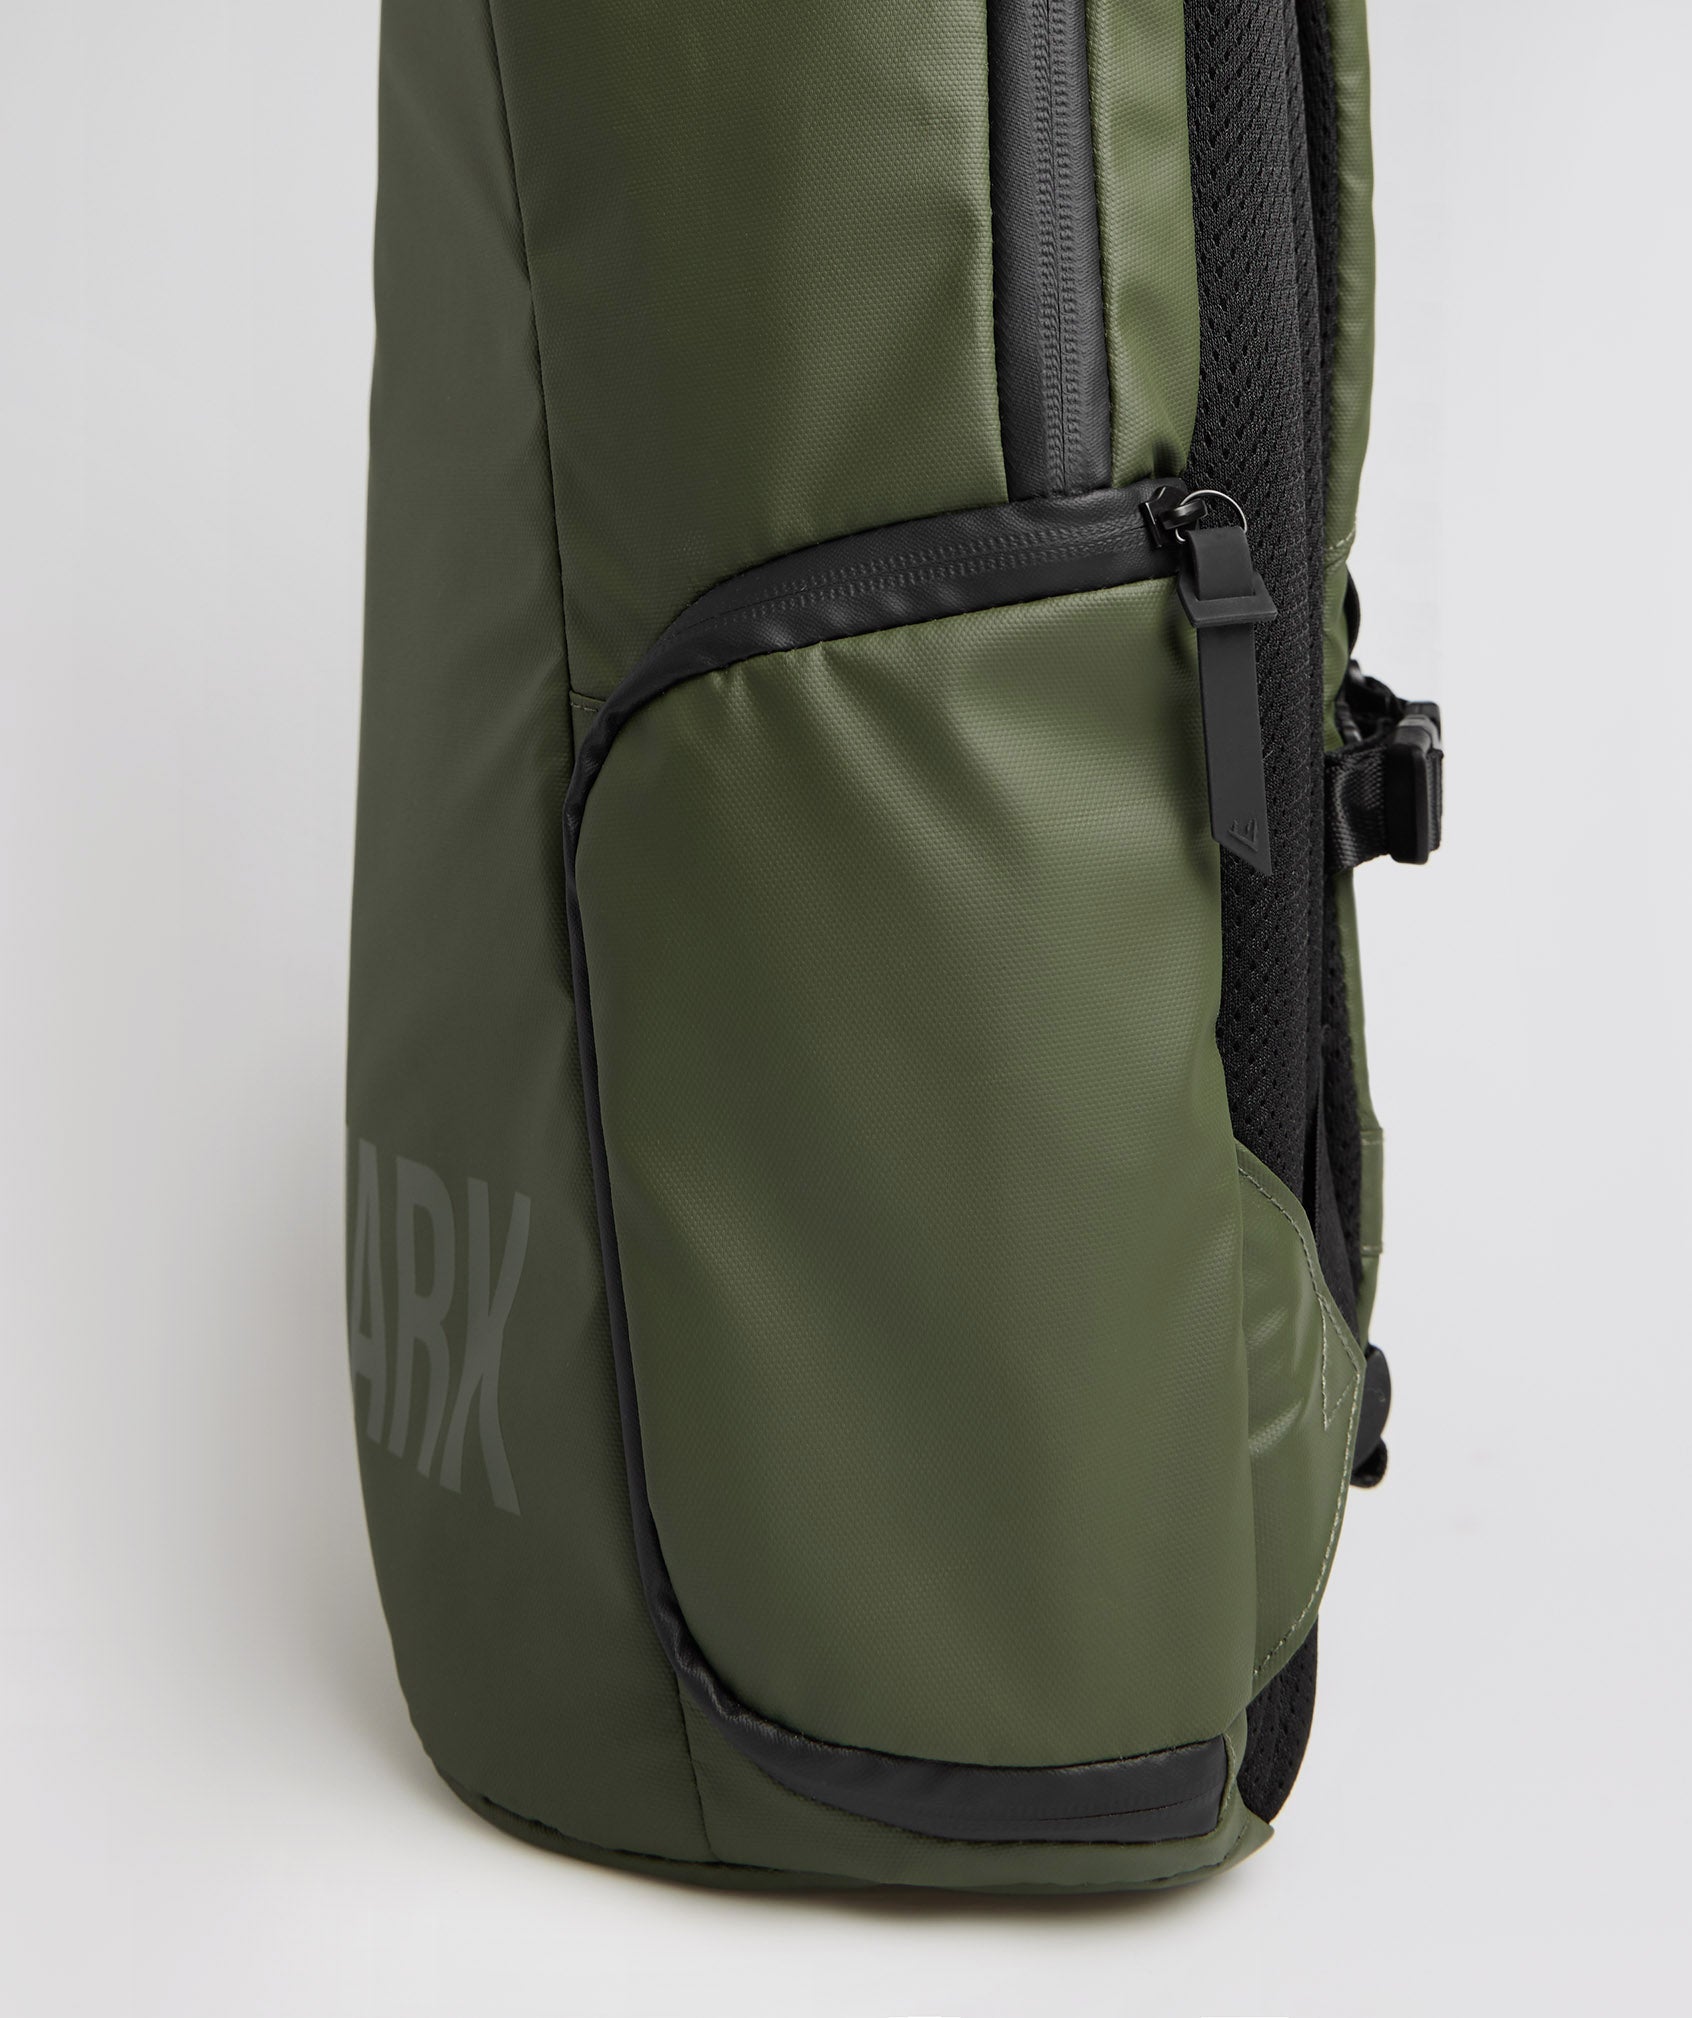 X-Series 0.1 Backpack in Core Olive/Black - view 3